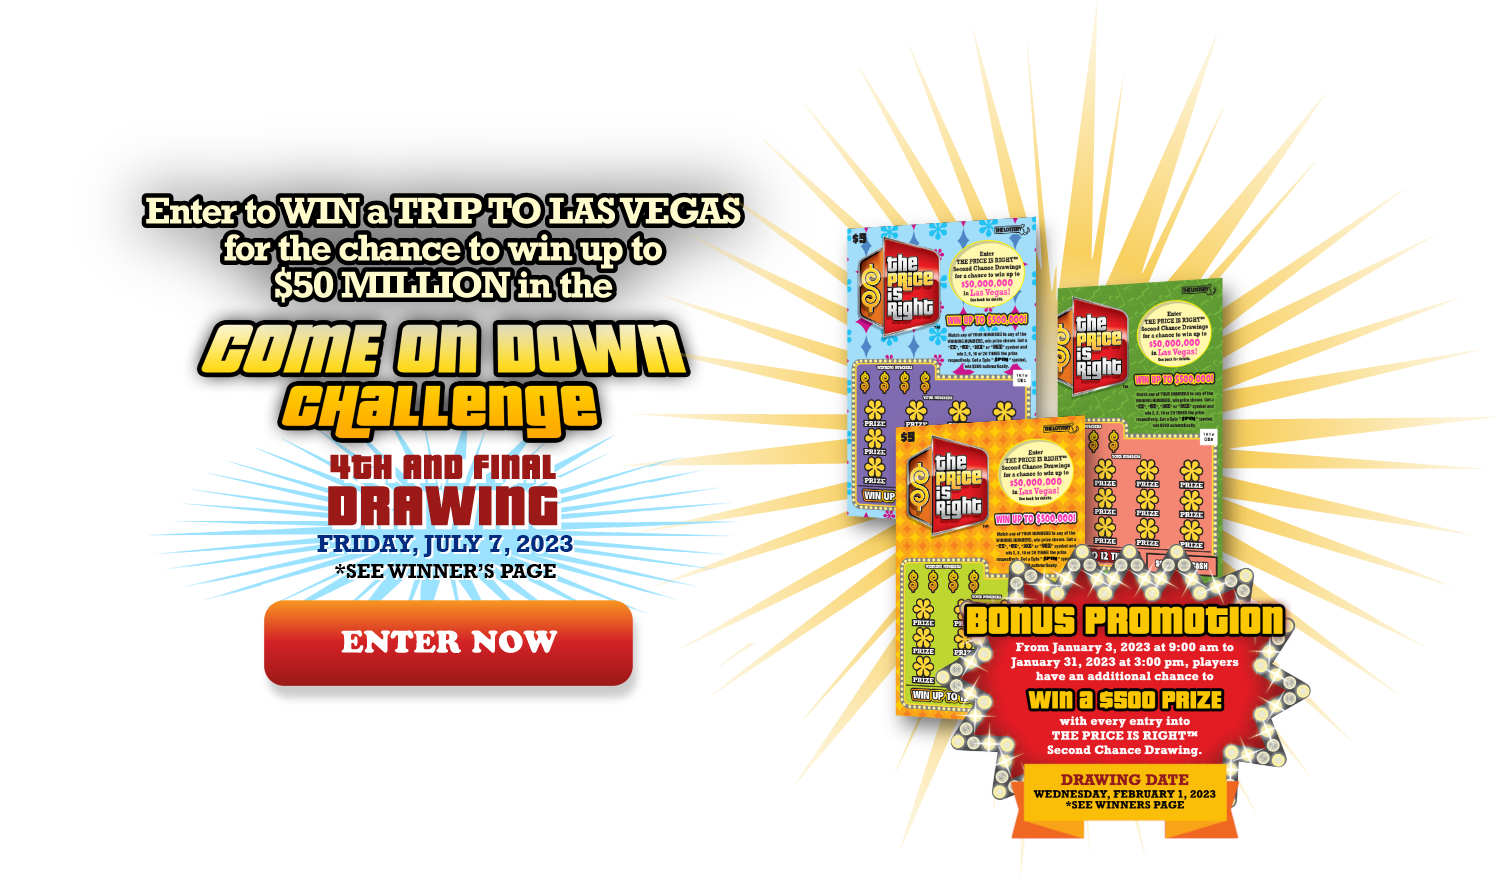 Enter to win a trip to Las Vegas for a chance to win up to $50 million in the Come on Down Challenge.  4TH & FINAL DRAWING. FRIDAY, JULY 7, 2023. SEE WINNER'S PAGE